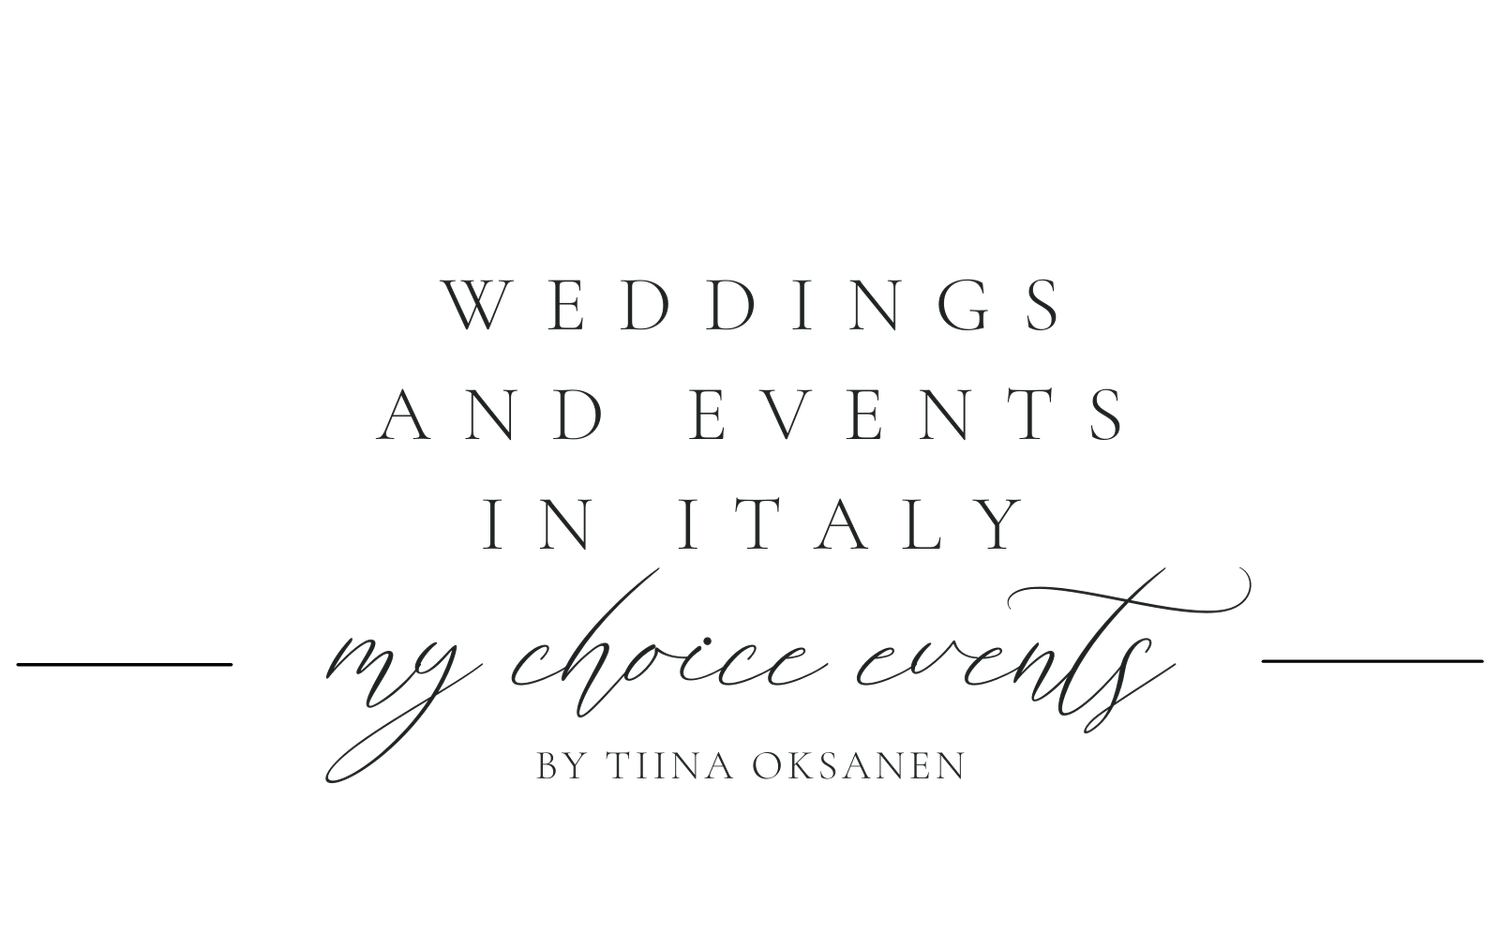 Weddings and events in Italy by wedding and event planner Tiina Oksanen